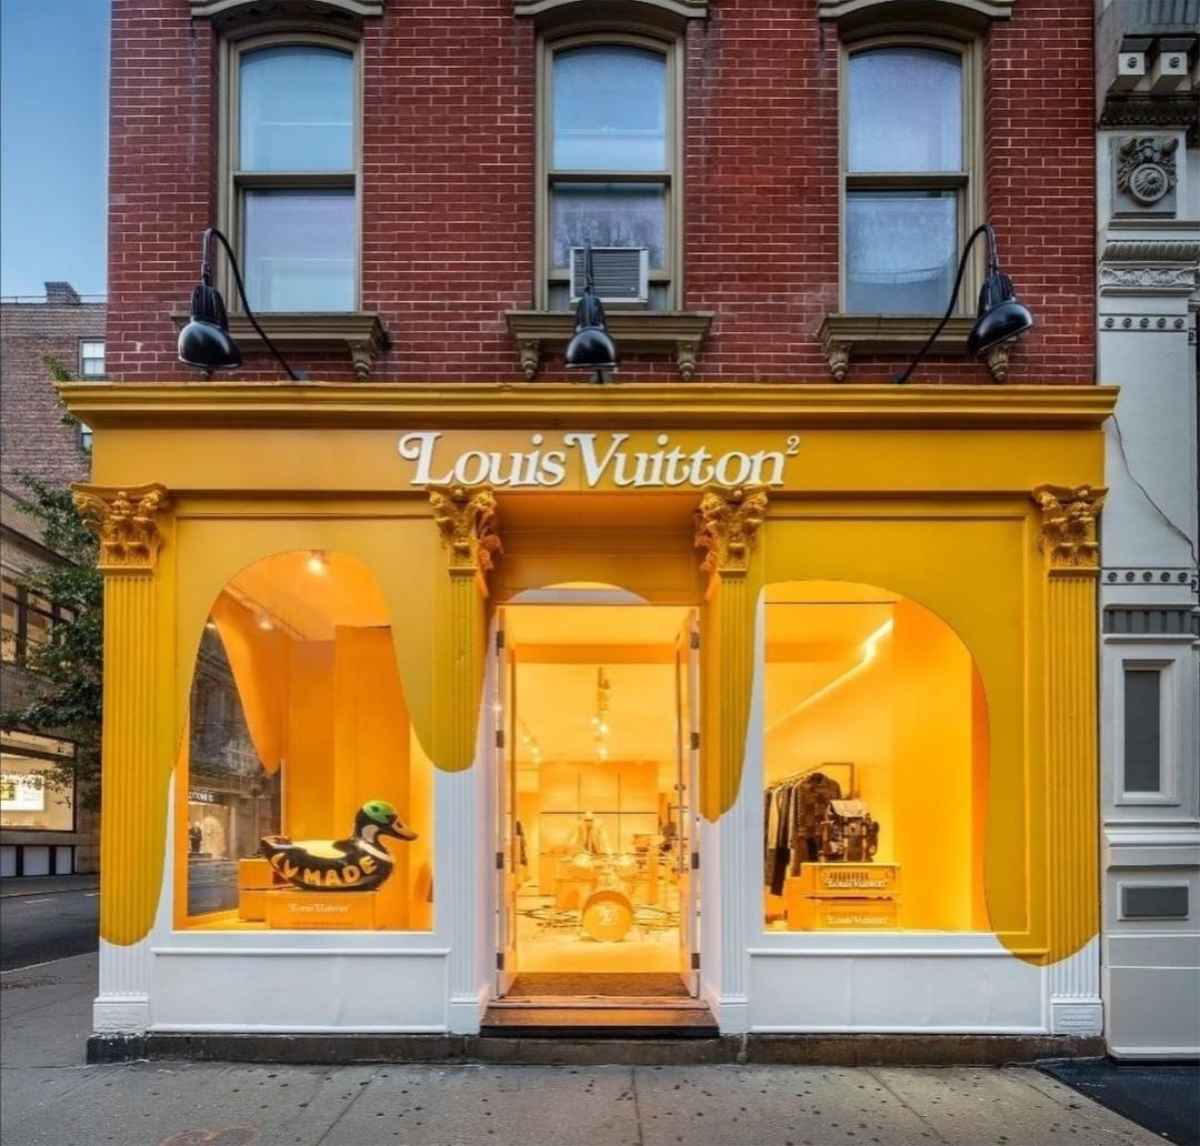 New openings of luxury boutiques - August 2020 - Luxferity Magazine